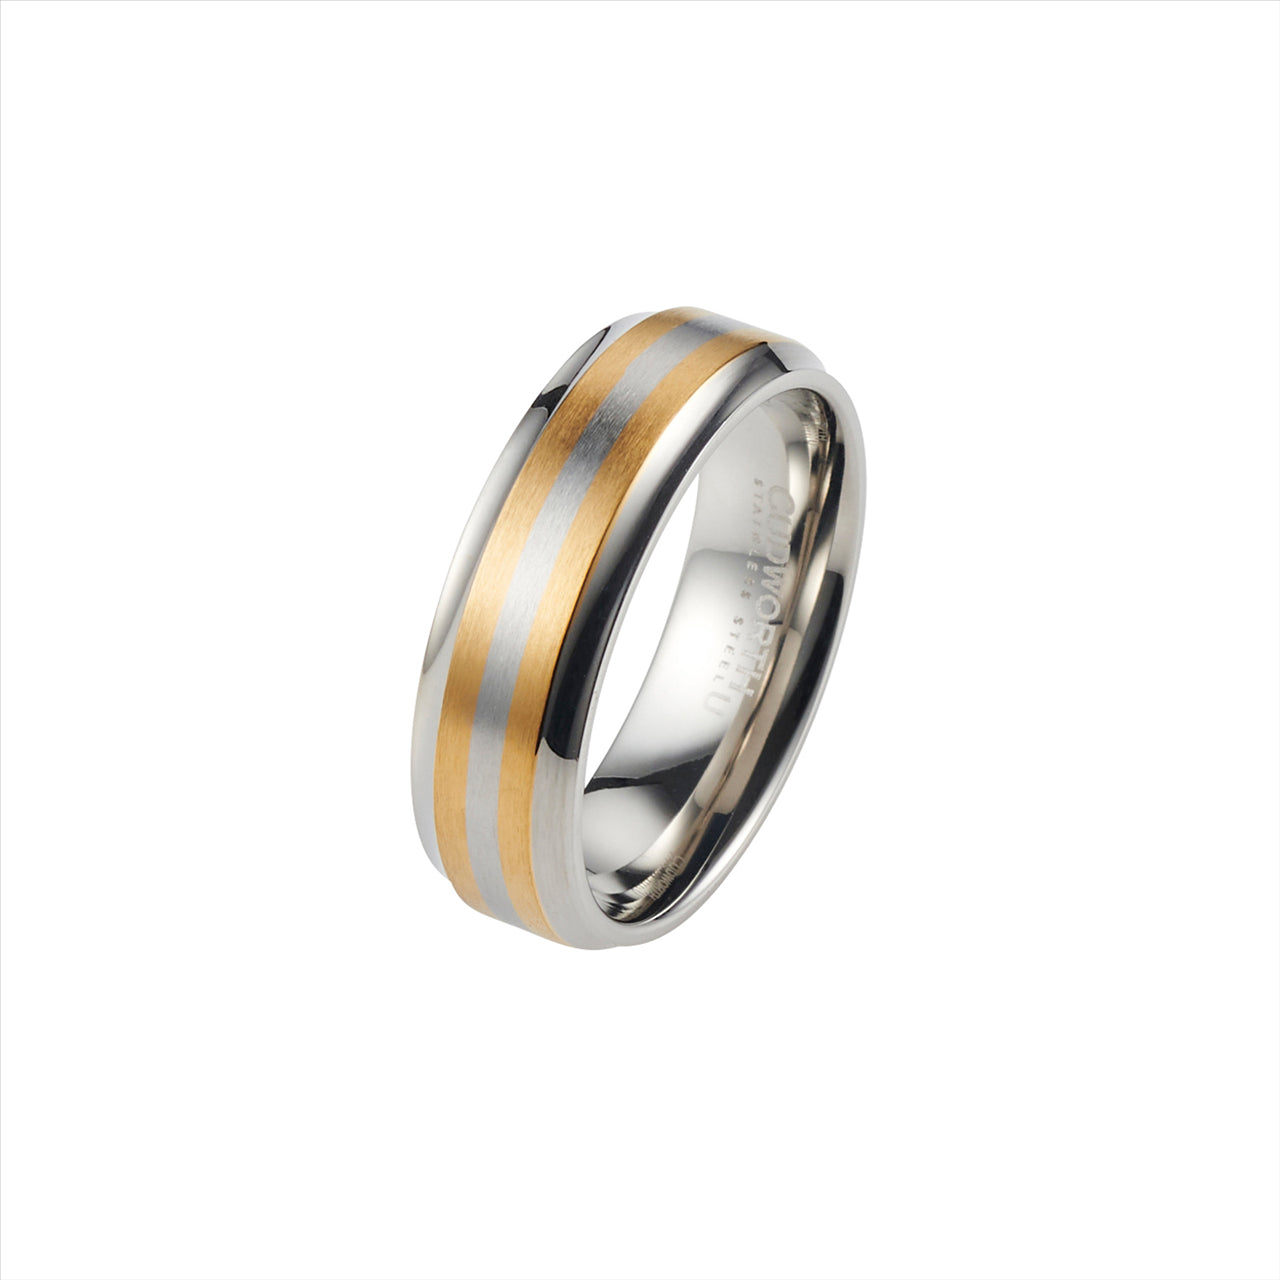 Gents Polished Stainless Steel Ring